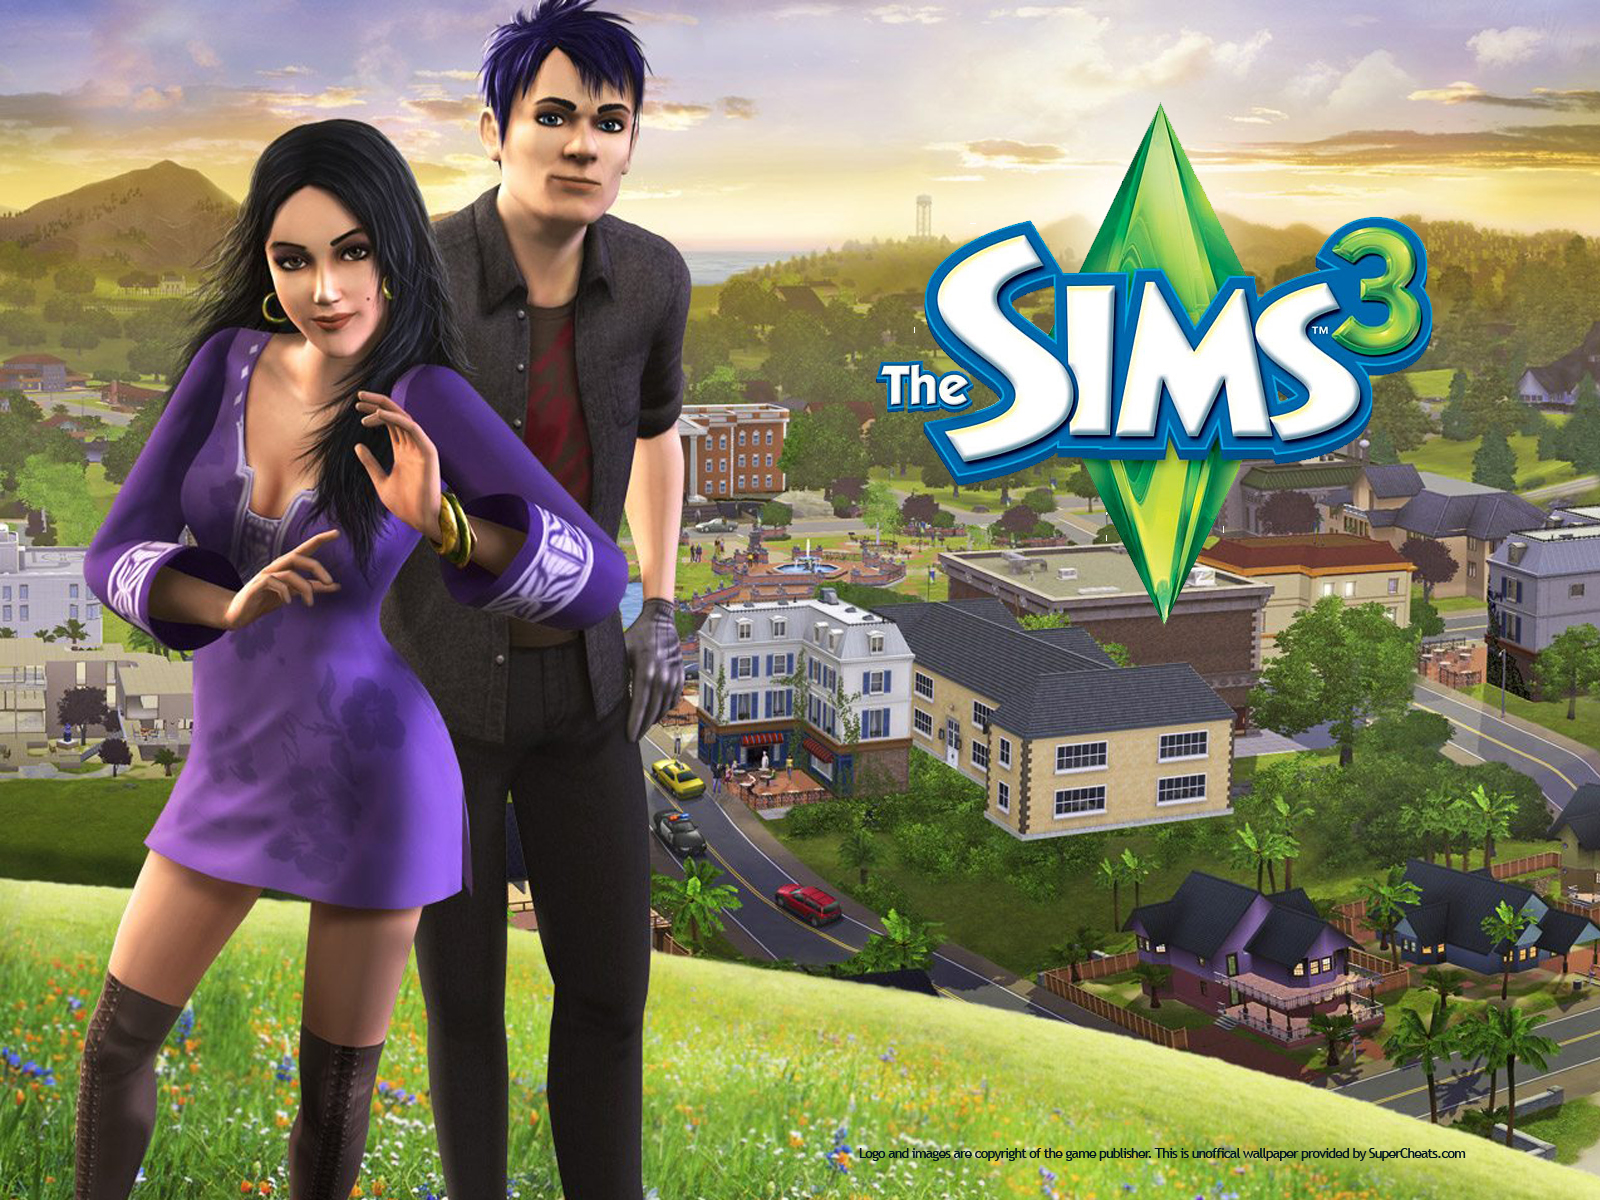 Sim 3 games. The SIMS 3. The SIMS 3 Electronic Arts. SIMS 3 SIMS 4. Симс 3 компьютерная версия.